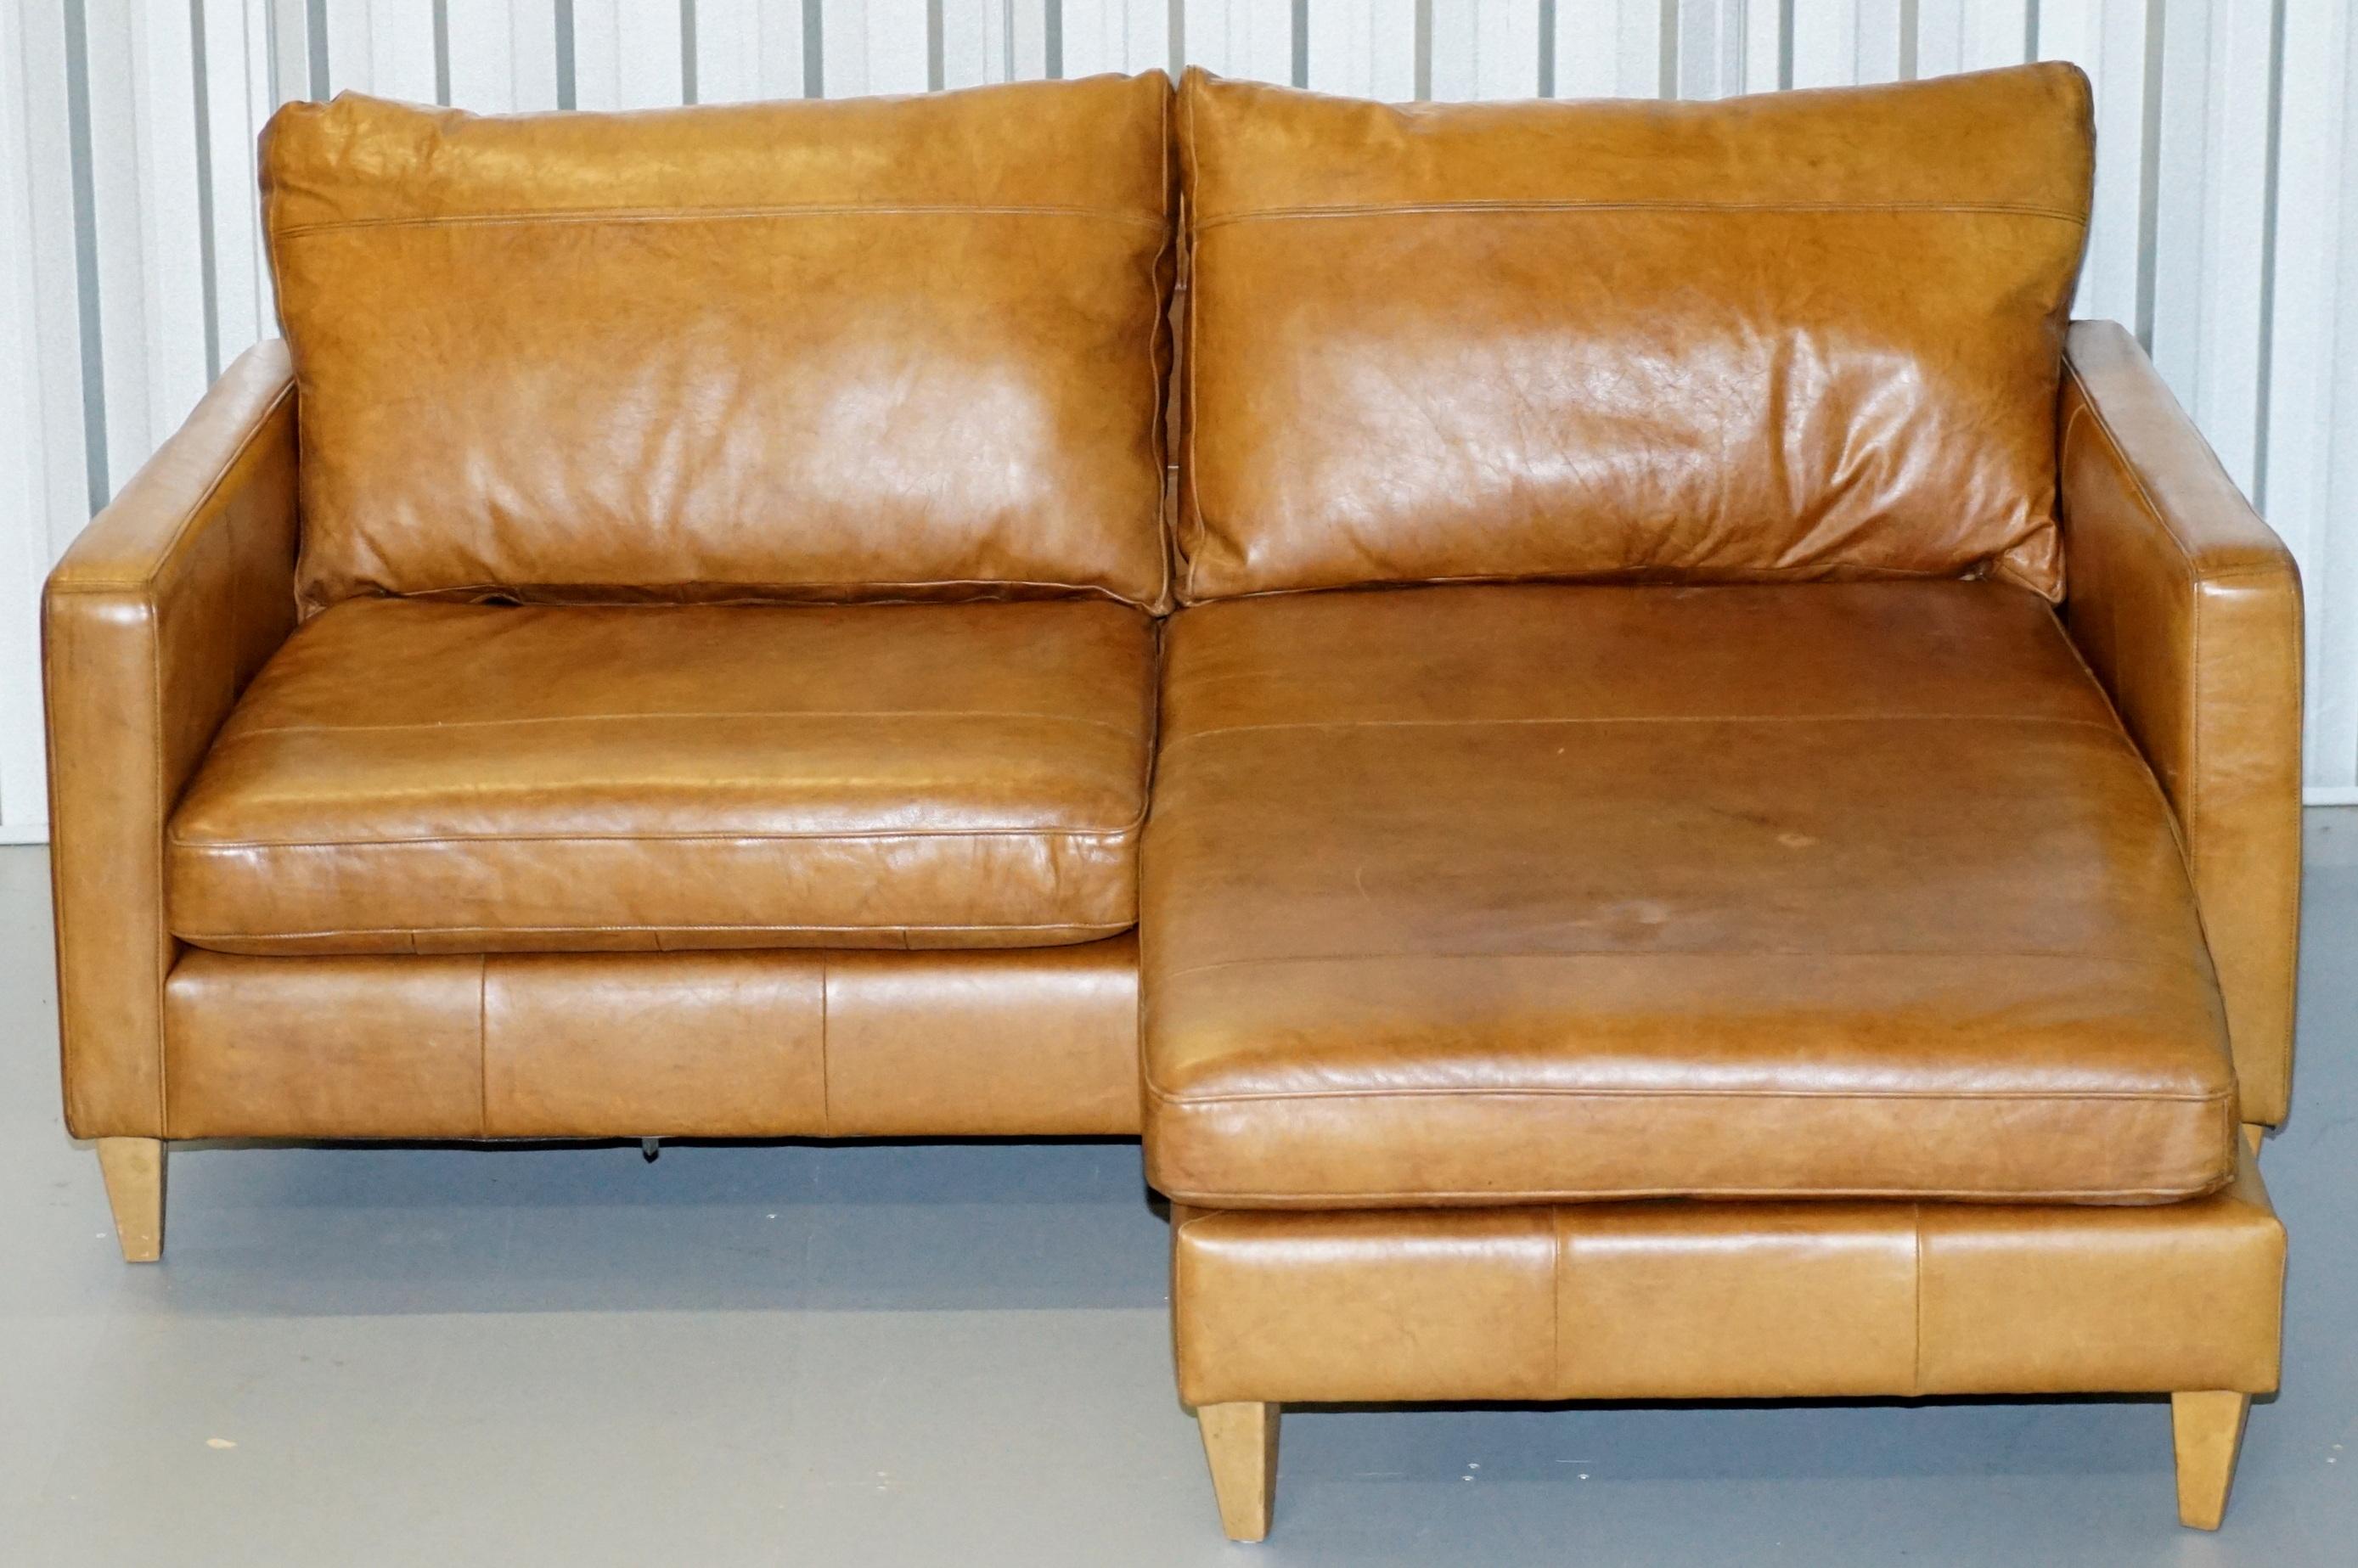 We are delighted to offer for sale this nice used tan brown leather corner sofa or sofa chaise with changeable footstool

A comfortable and nicely made sofa, the footstool can be used either side, this is classed as a sofa chaise feature

We